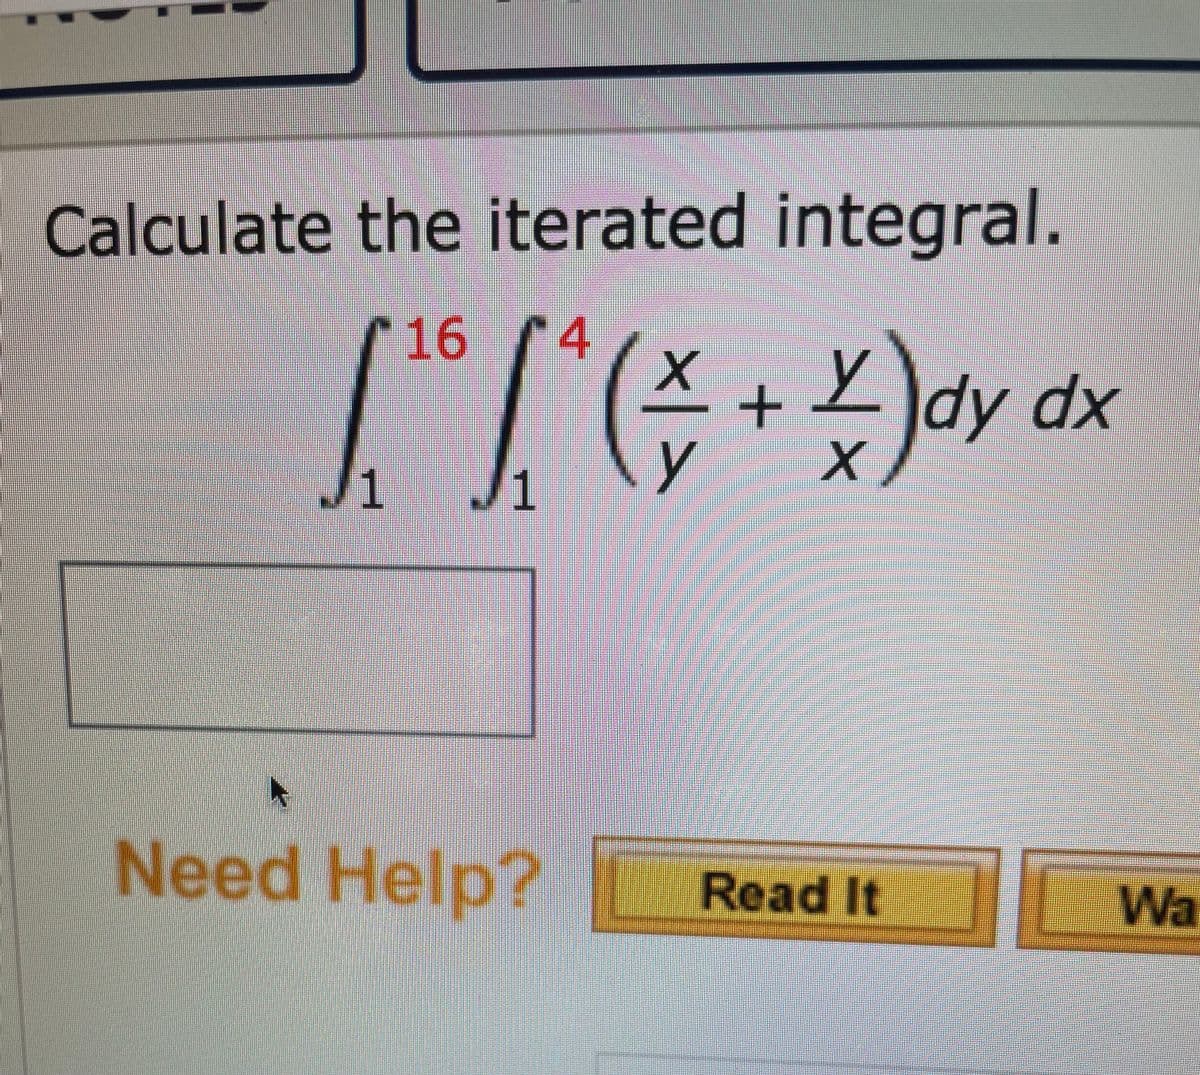 Calculate the iterated integral.
16
Jdy dx
1
Need Help?
Read It
Wa
